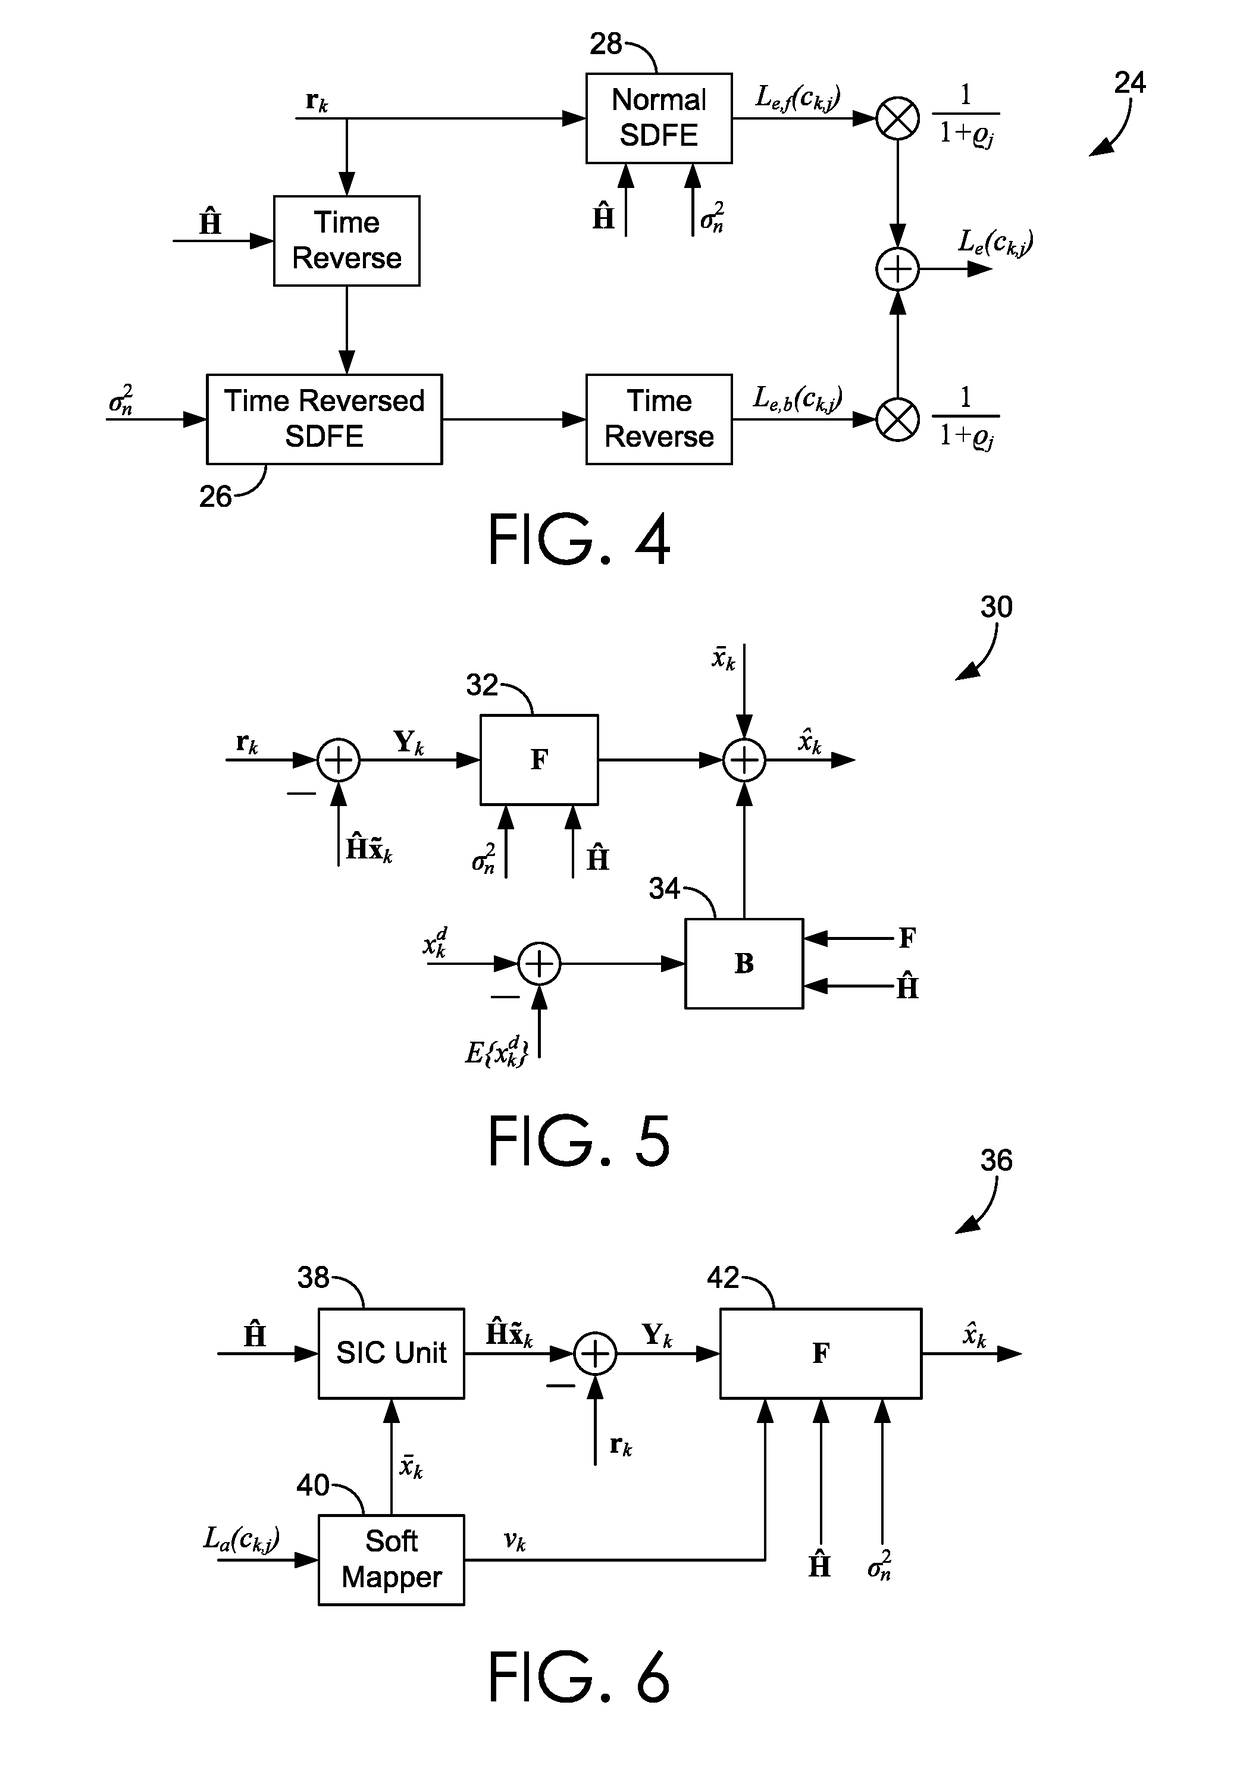 Turbo receivers for single-input single-output underwater acoustic communications